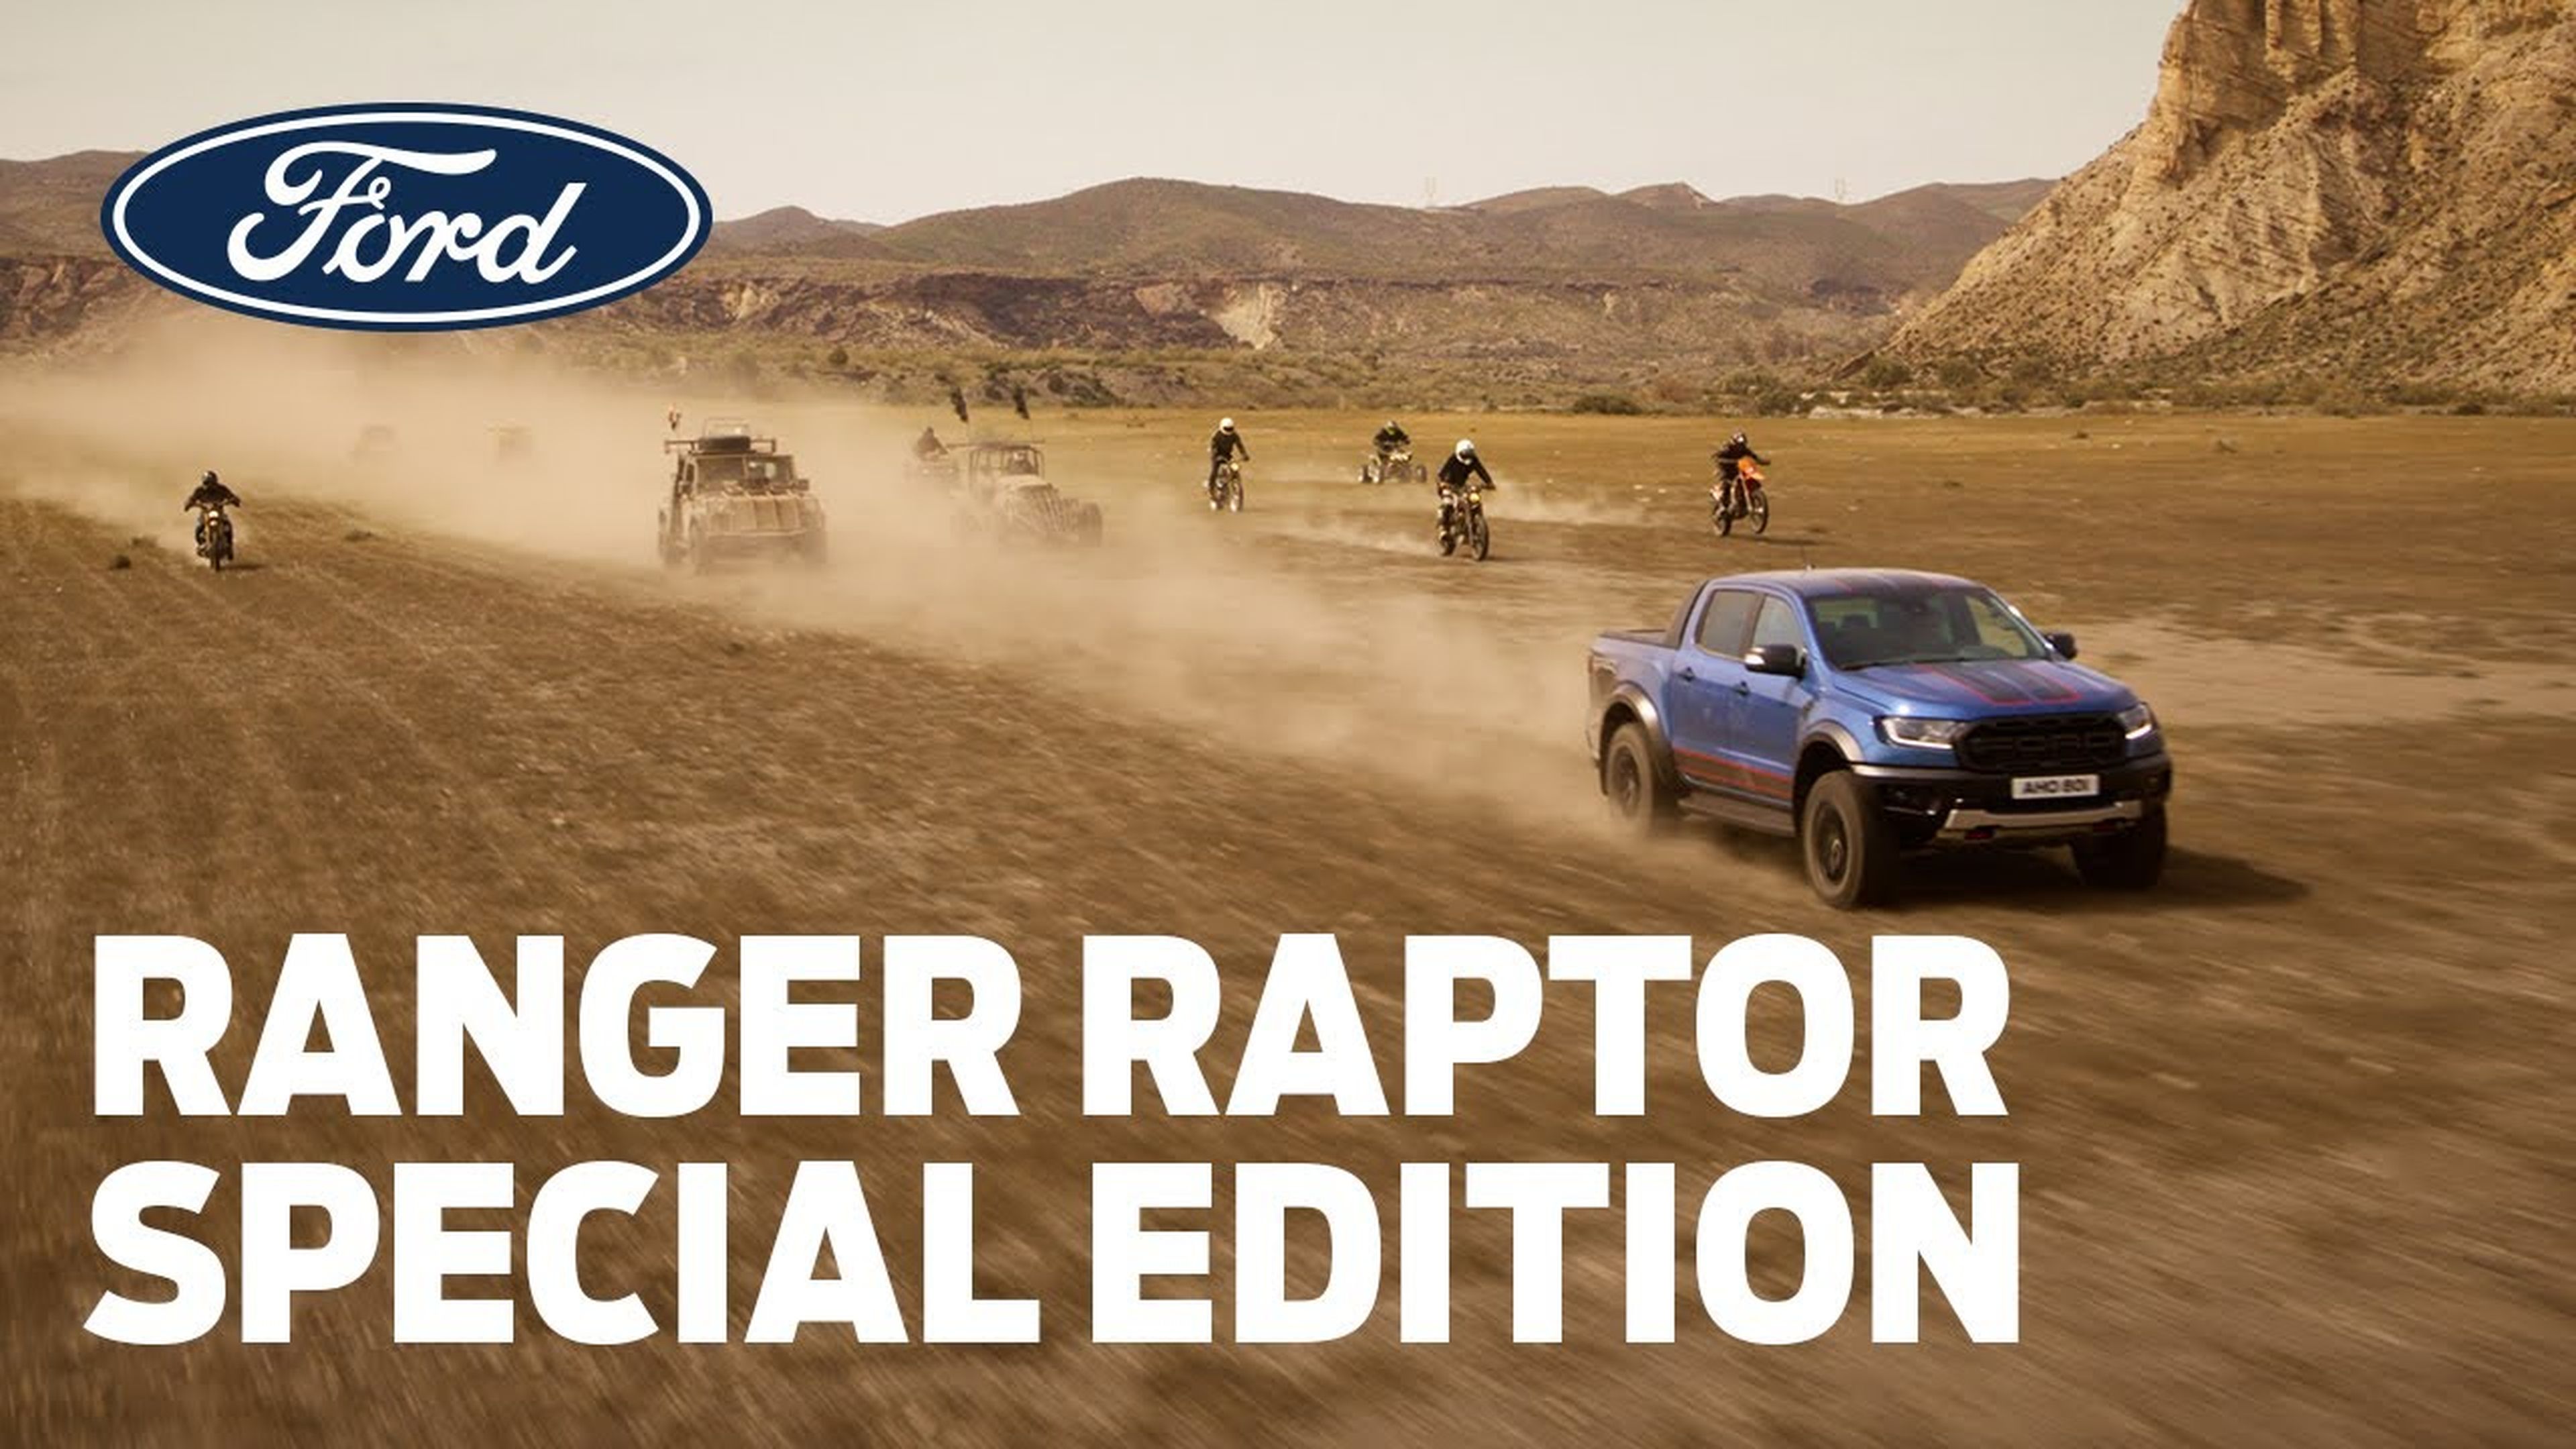 Ranger Raptor Special Edition: The Good, The Bad + The Badass